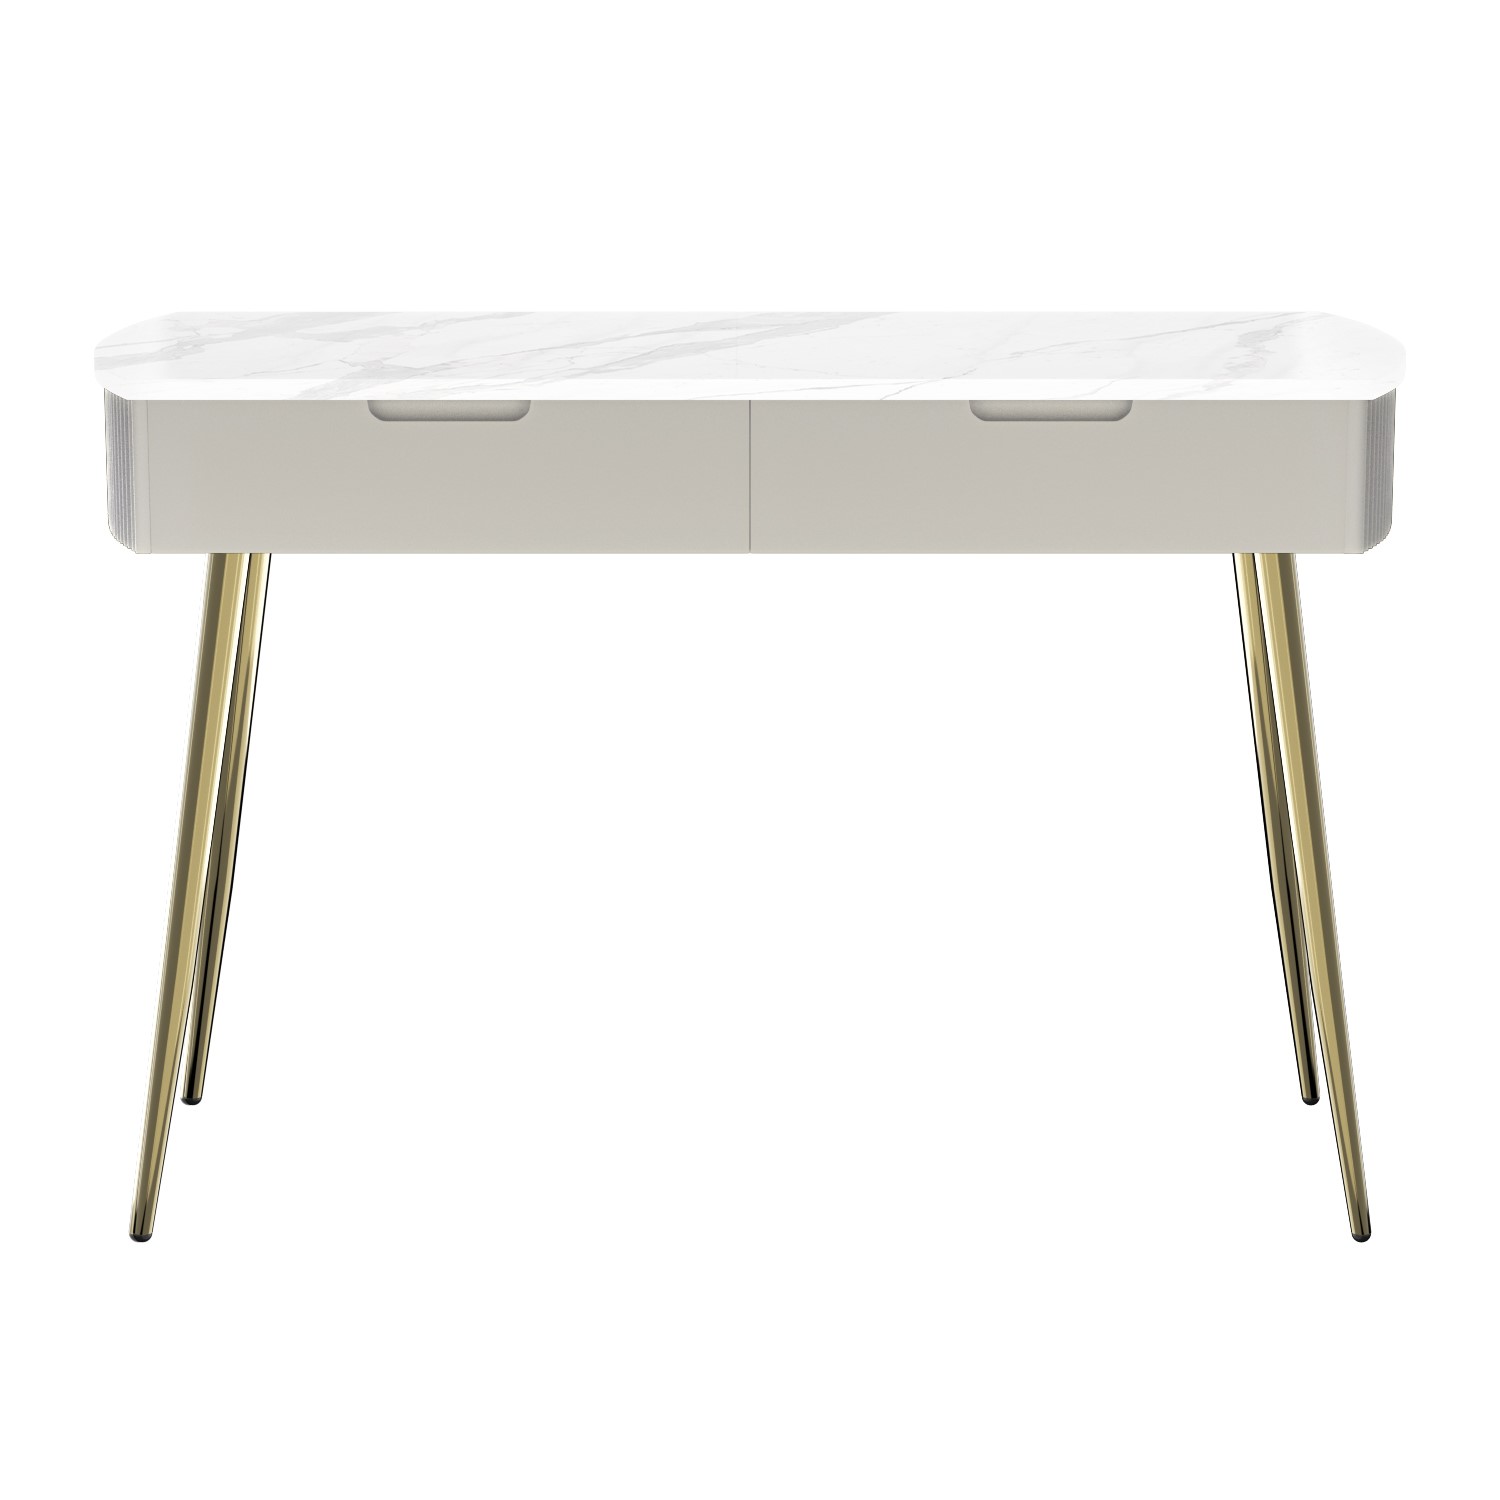 Read more about Curved taupe marble top dressing table with 2 drawers lorenzo